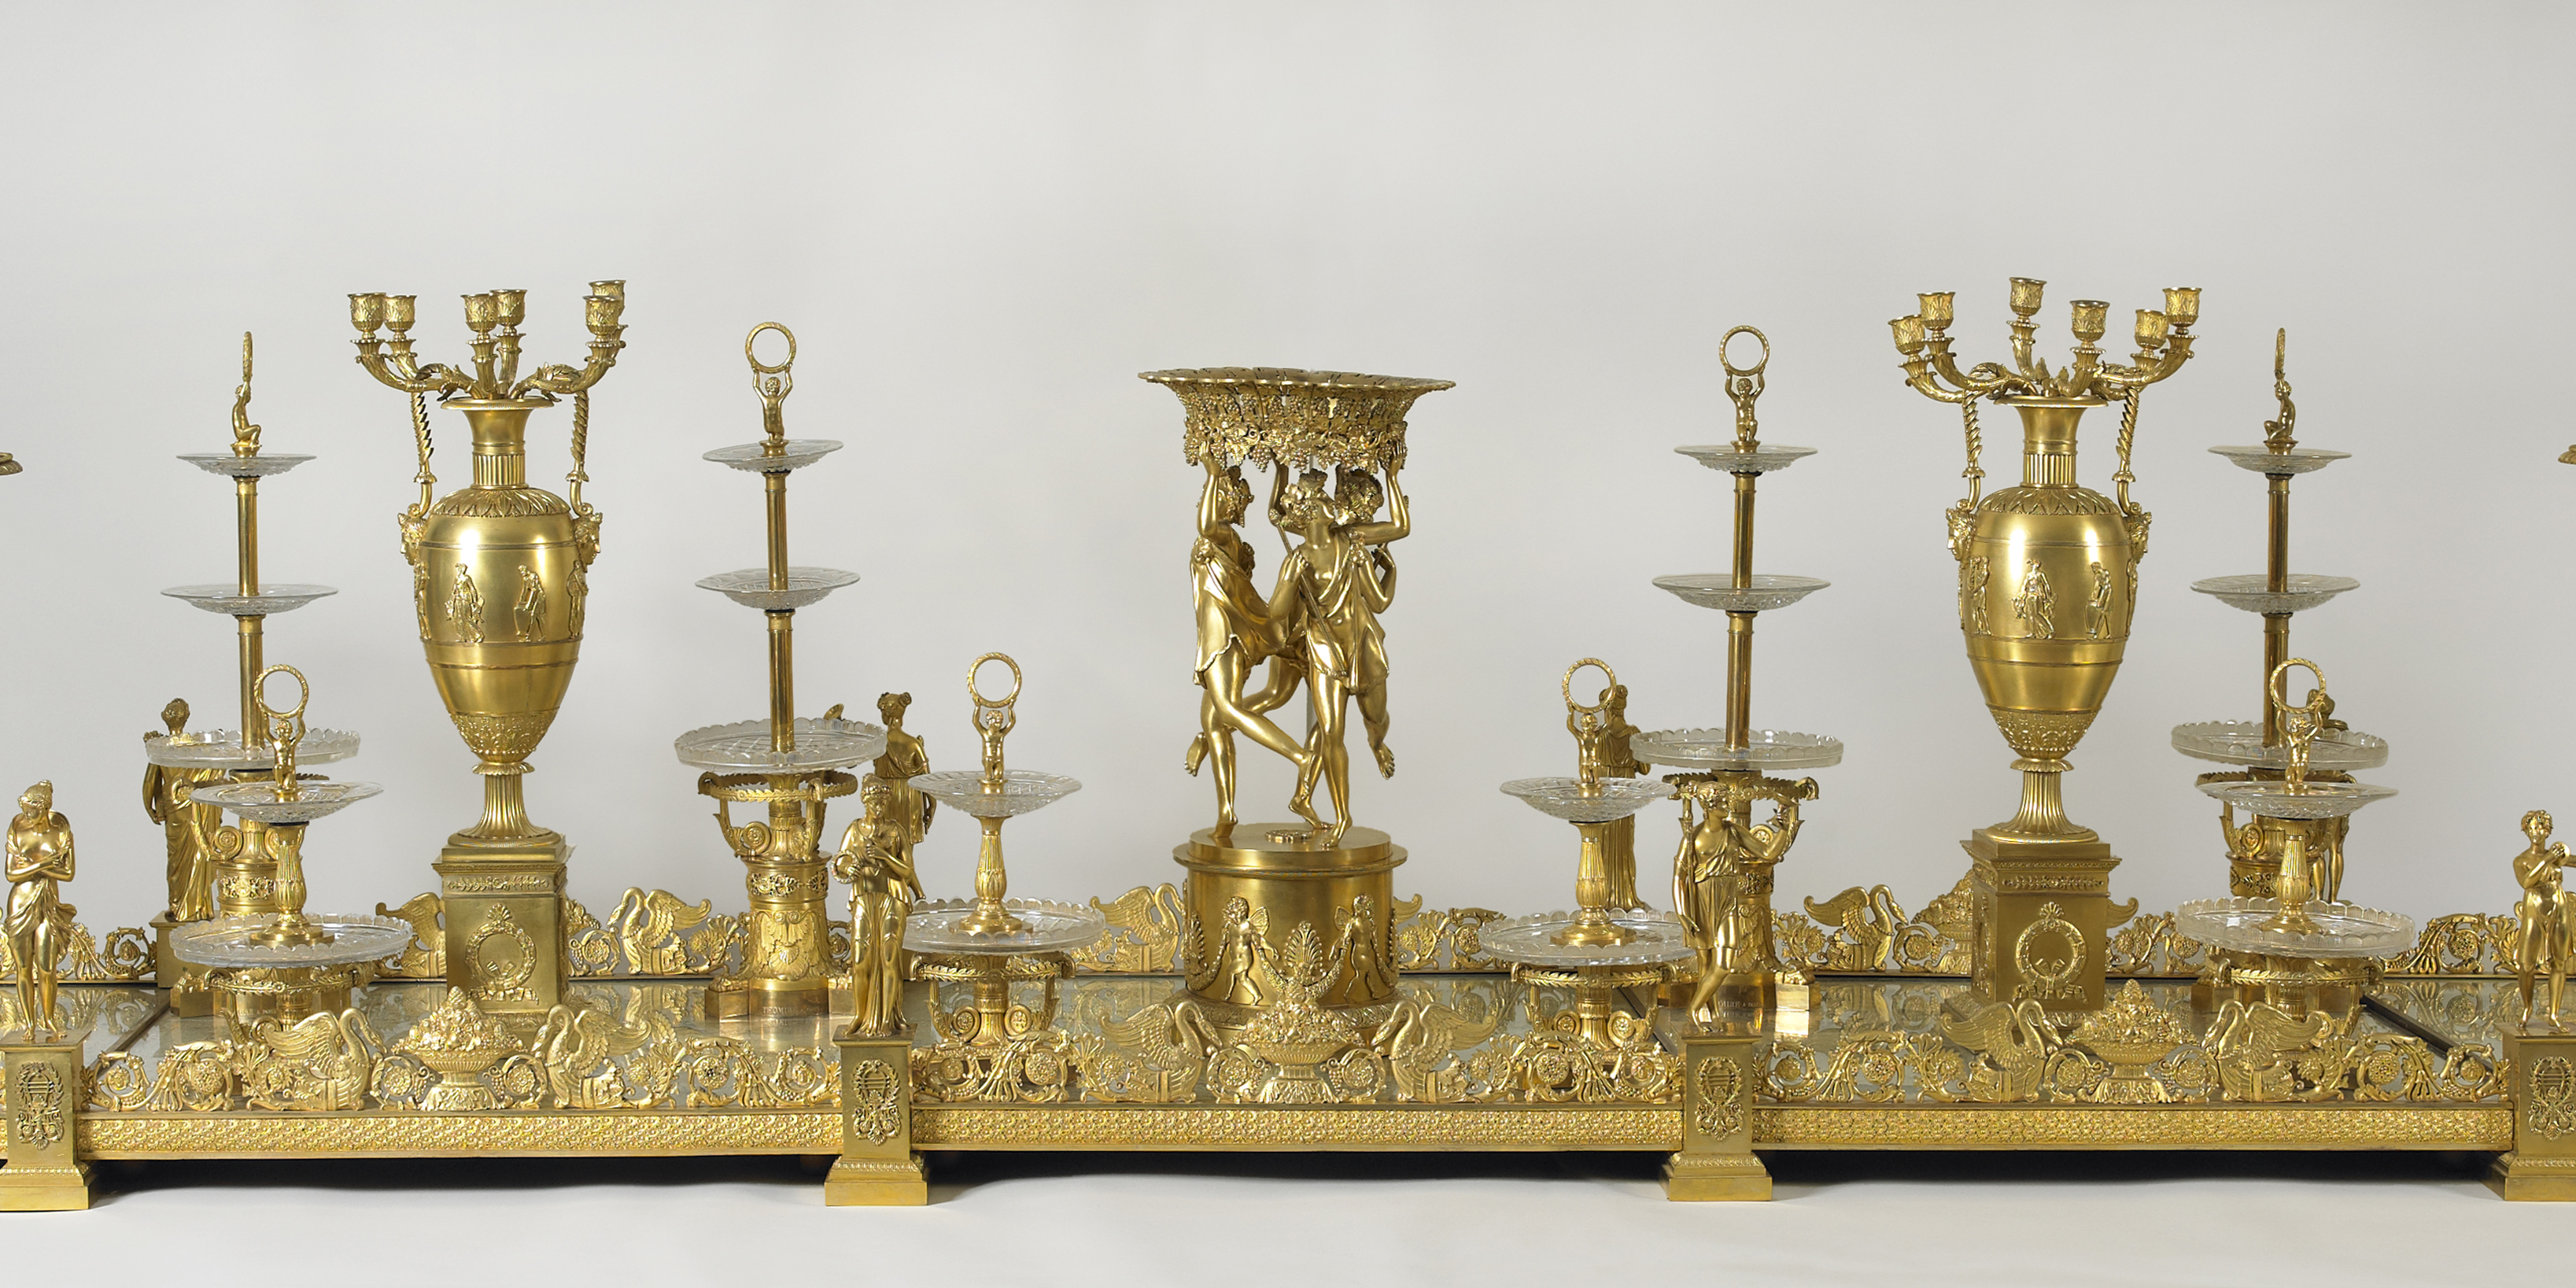 Dining and diplomacy public program. Image of gilded bronze table centerpiece featuring ornate candelabra and mirrored base. Scroll down for additional program information.